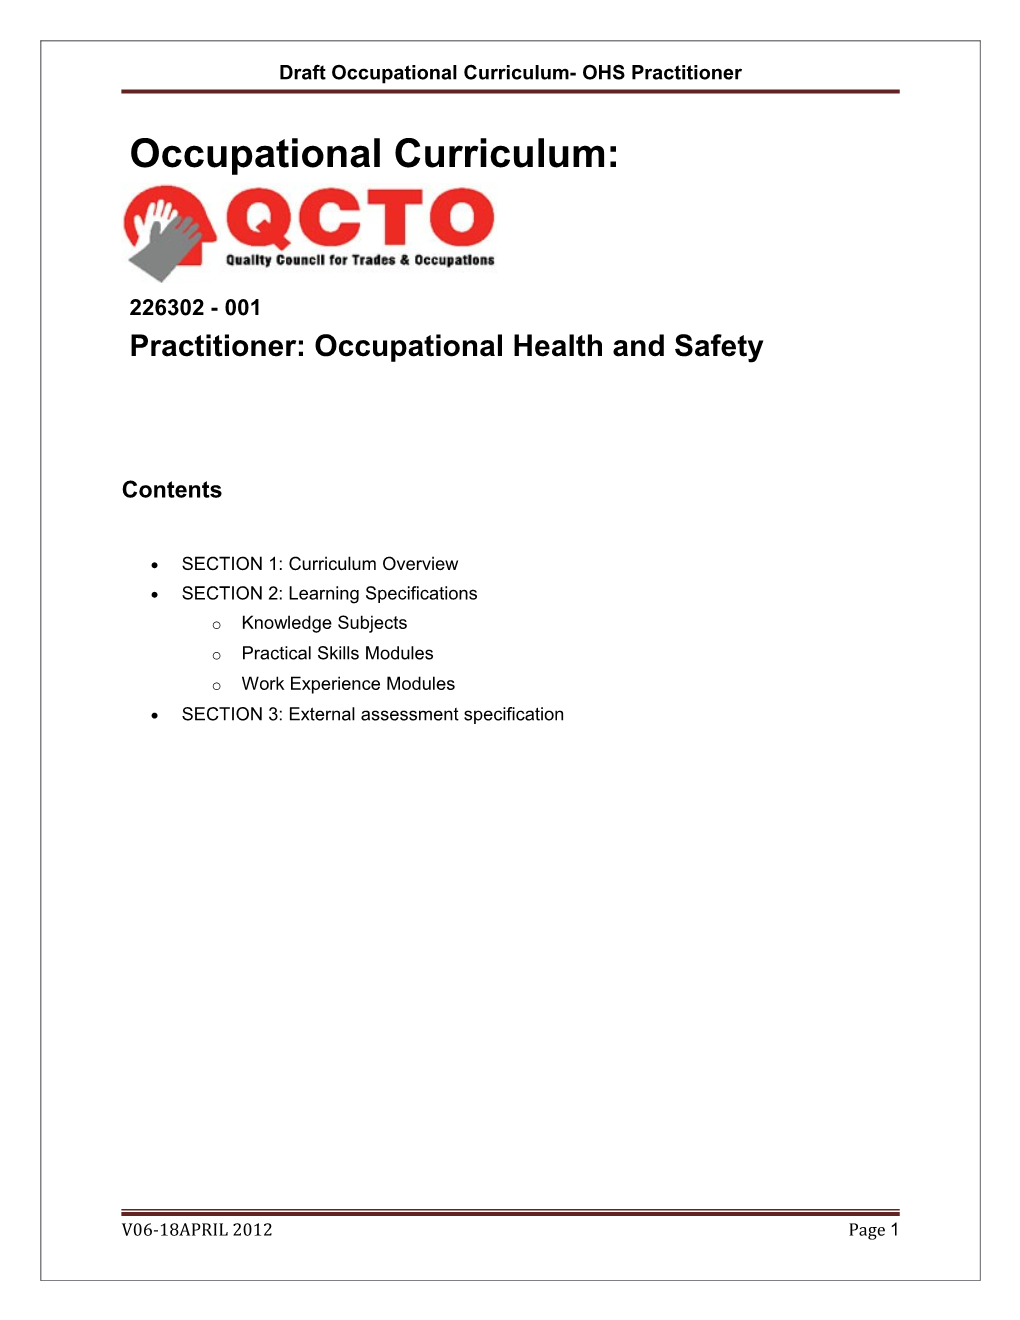 Draft Occupational Curriculum- OHS Practitioner